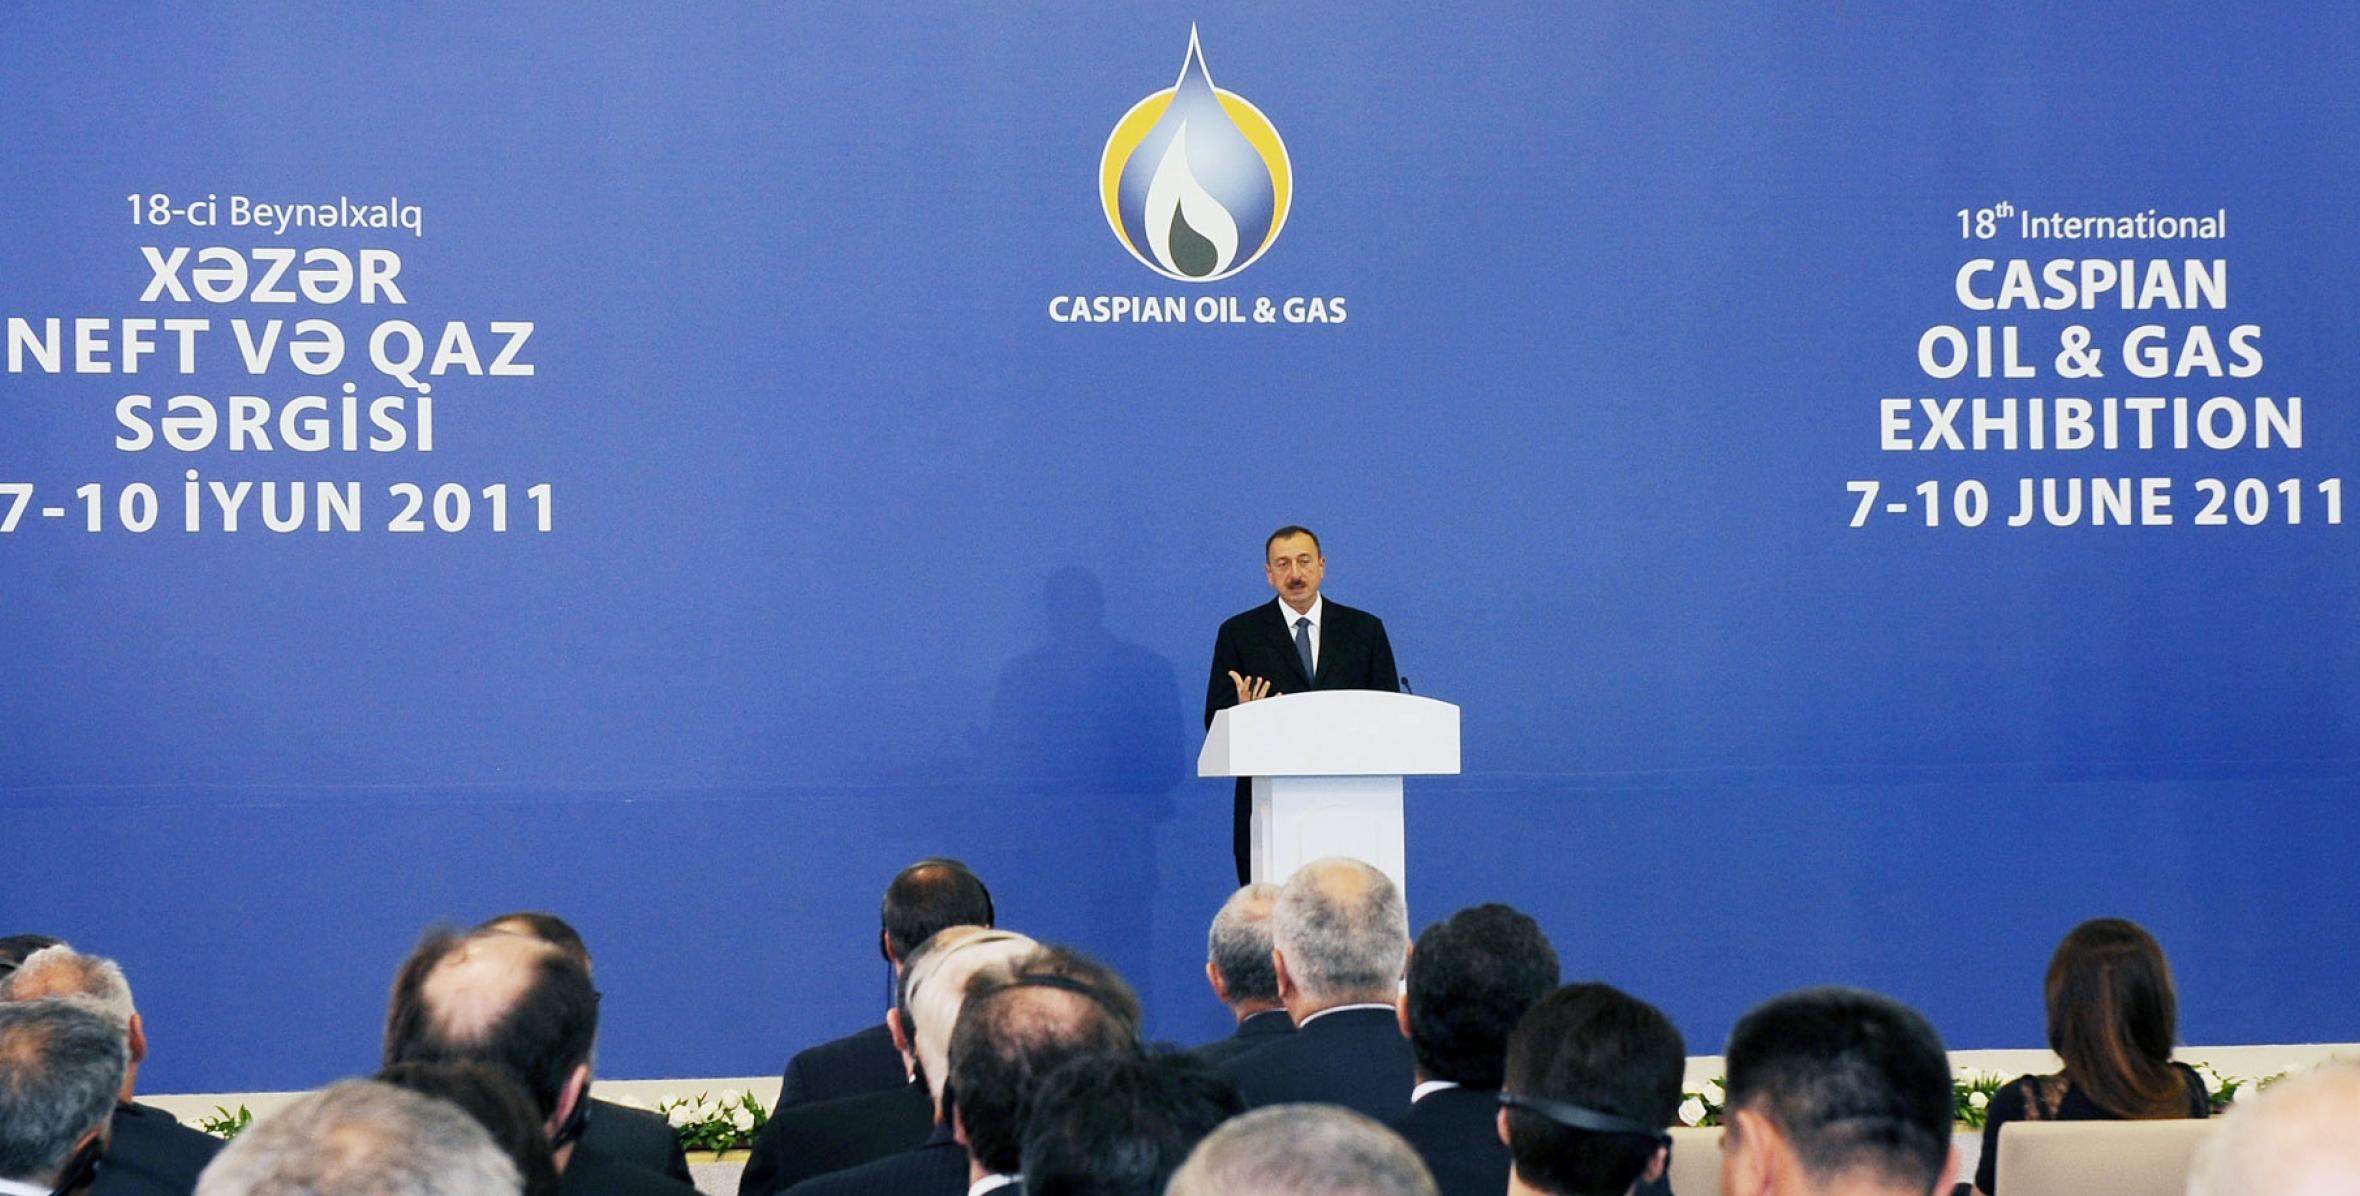 Speech by Ilham Aliyev at the opening ceremony of the 18th international exhibition and conference “Caspian oil and gas”